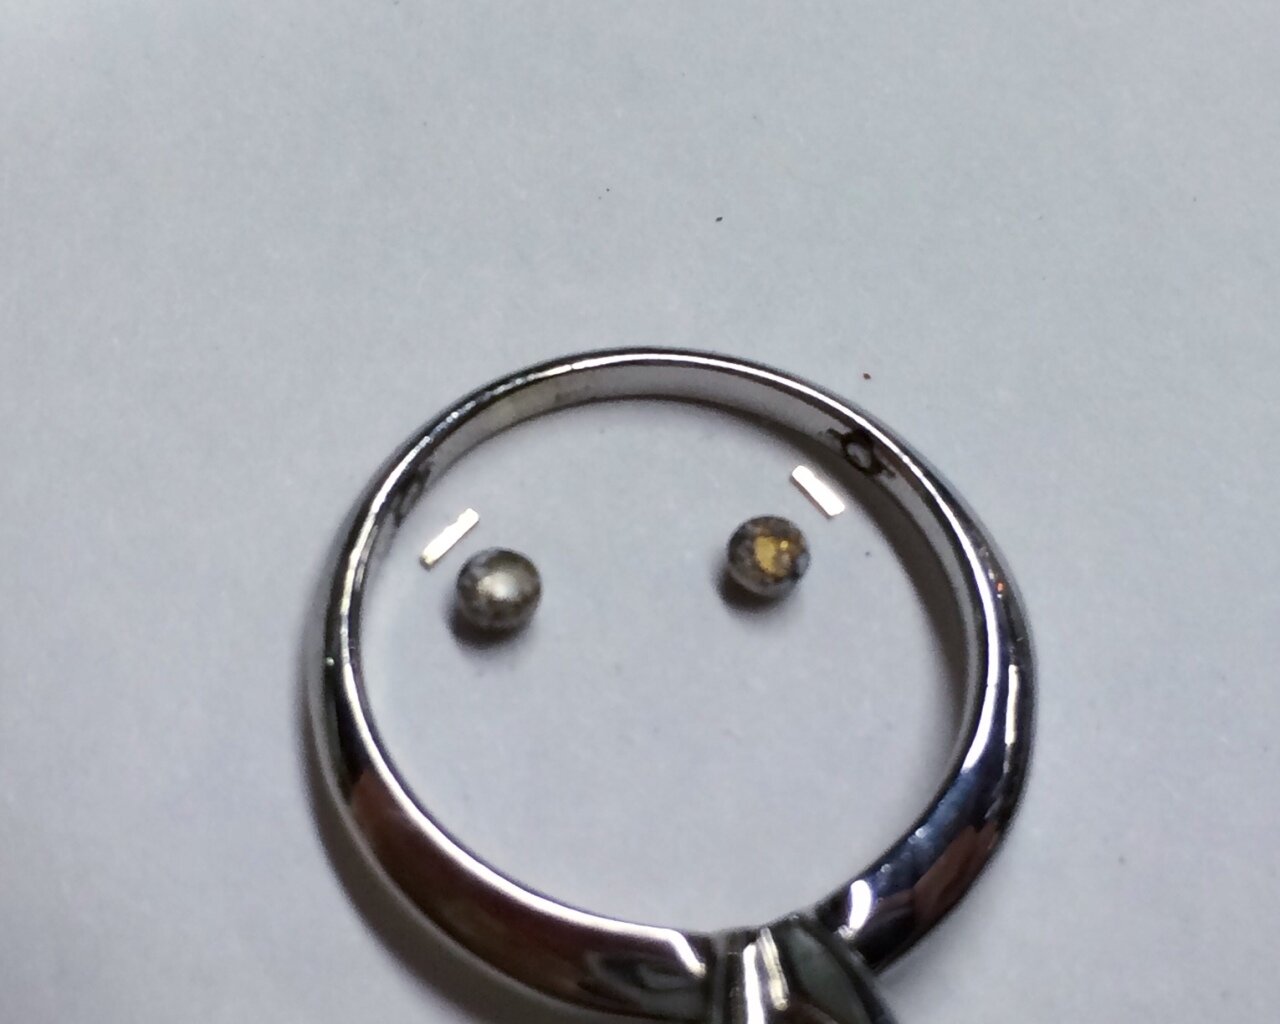 How To Make Sizing Beads To Size A Ring Down